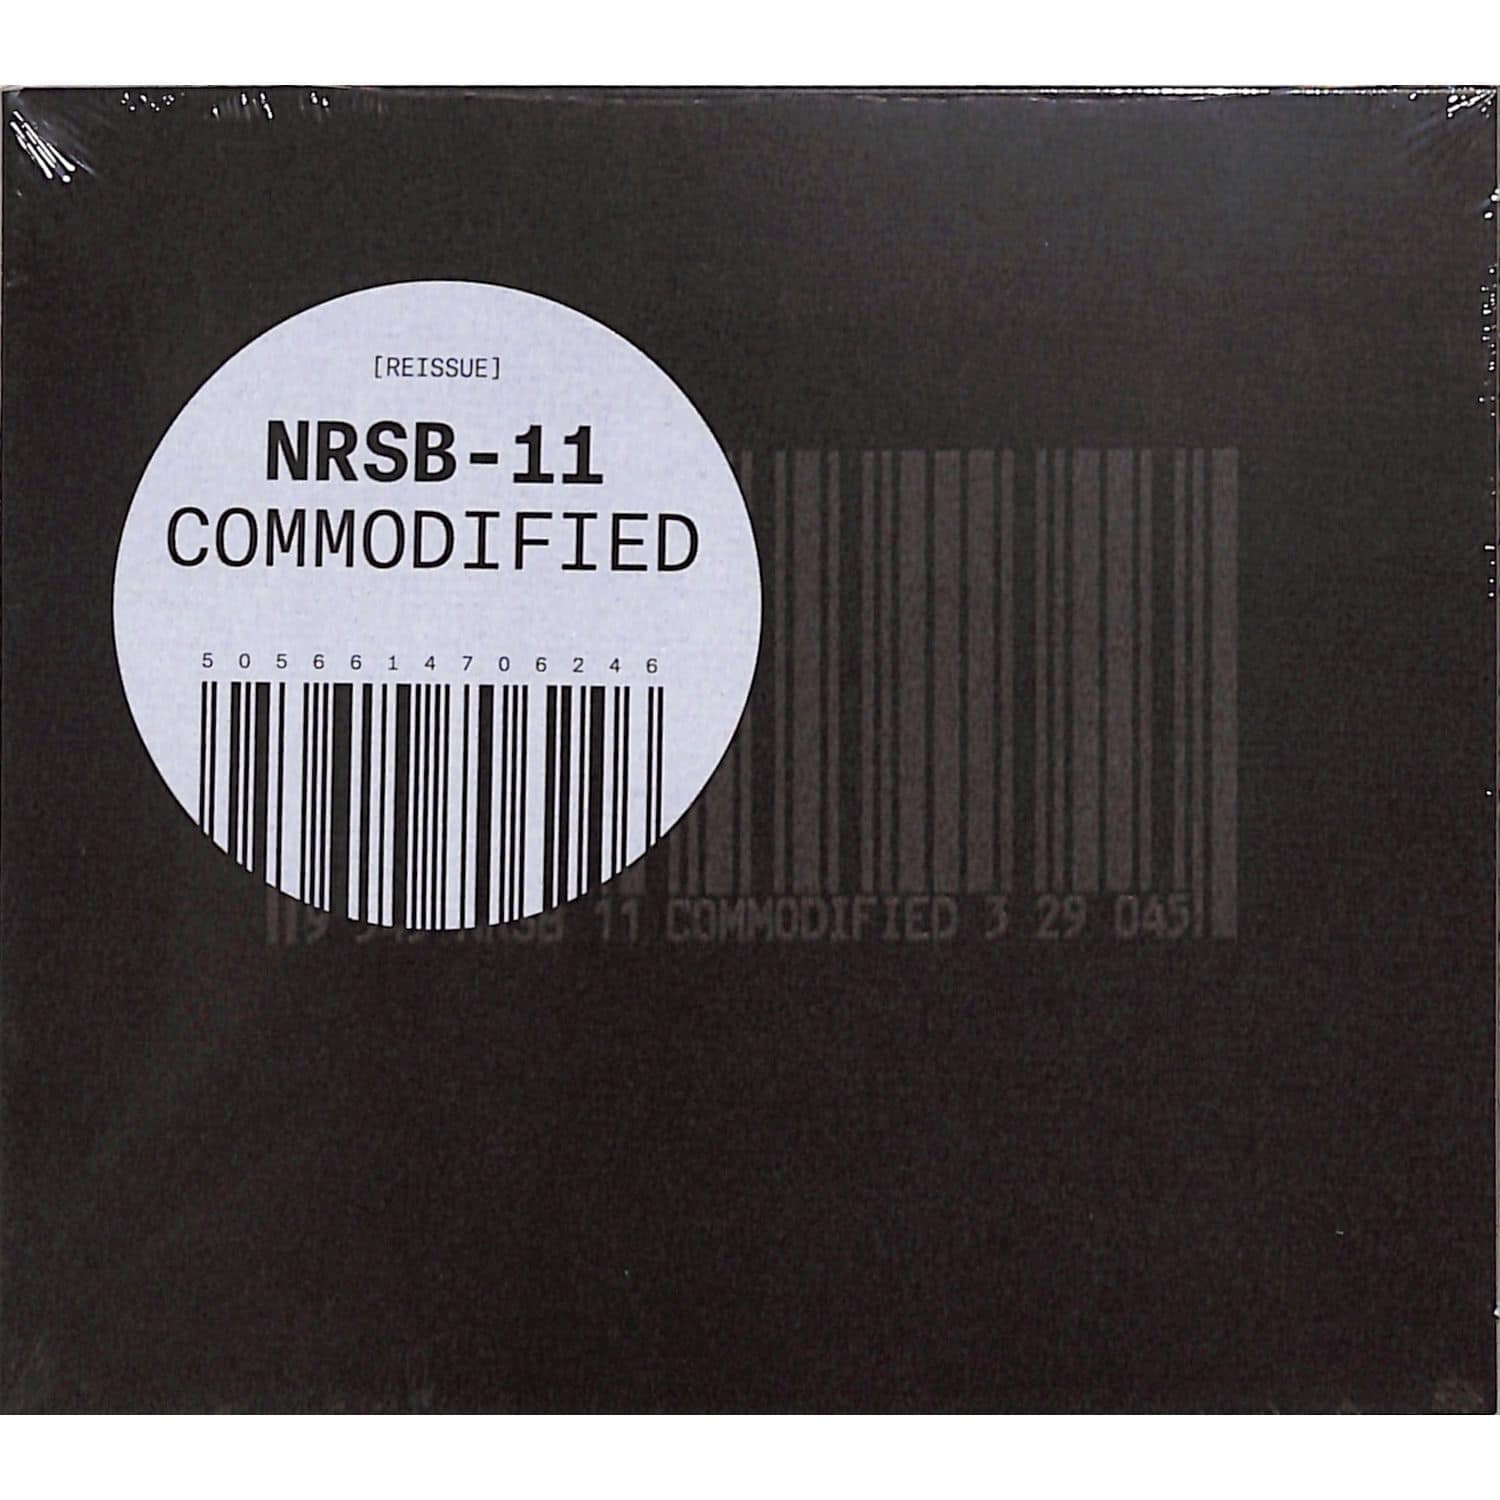 NRSB-11 - COMMODIFIED 